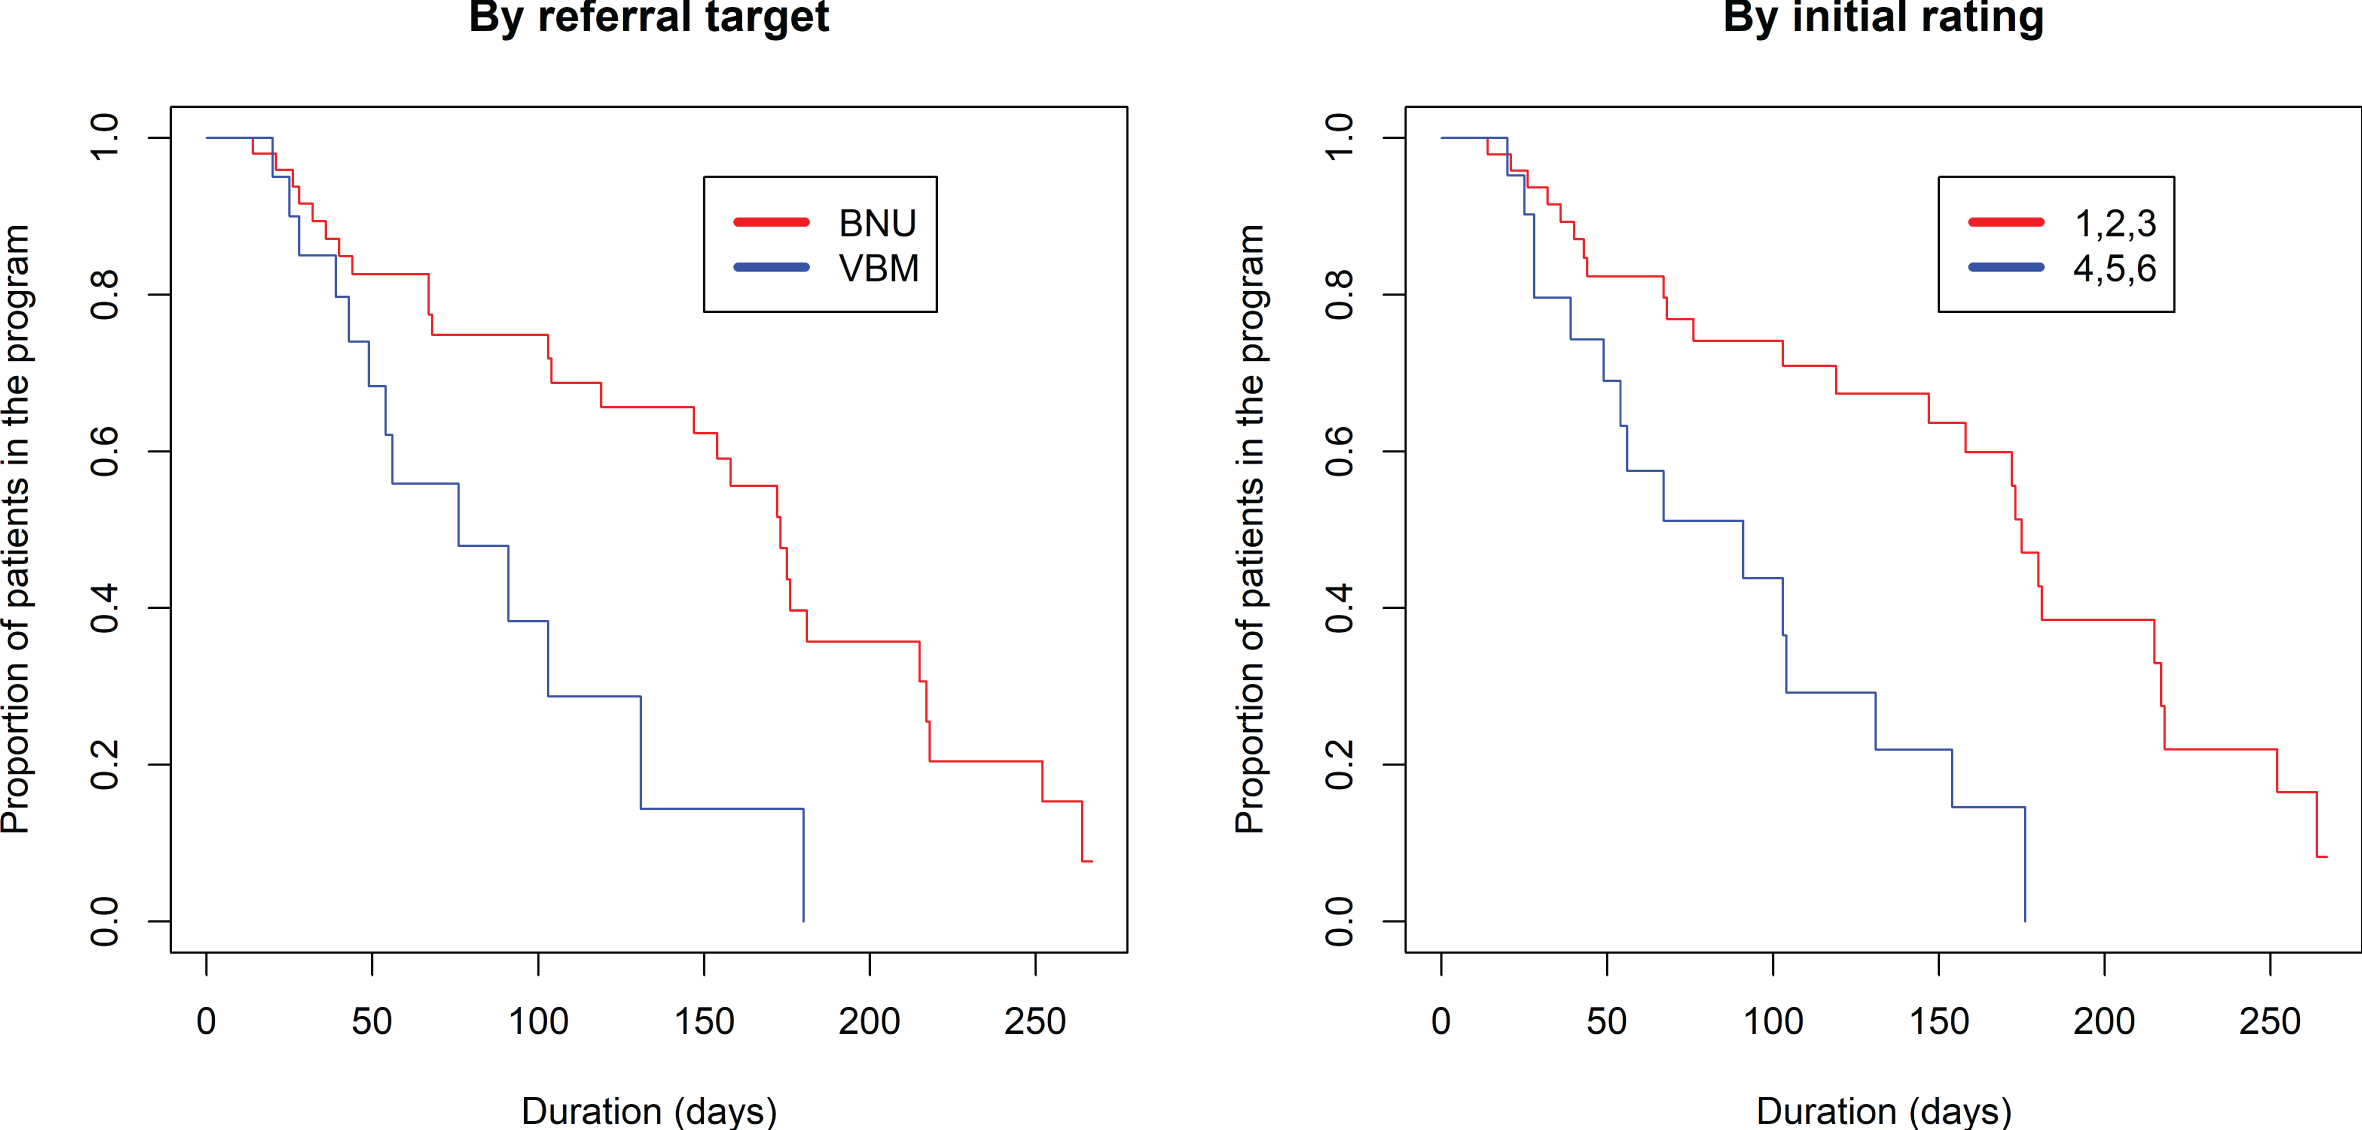 Kaplan-Meier estimated “survival” plots showing proportion of patients still in the program (rating 1 to 6) based on number of days in the program. Plot on left shows patients divided by referral to VBM alone or VBM plus BNU. Plot on right shows patients with initial severity rating of 1, 2, or 3 (in red) or 4, 5, or 6 (in blue).